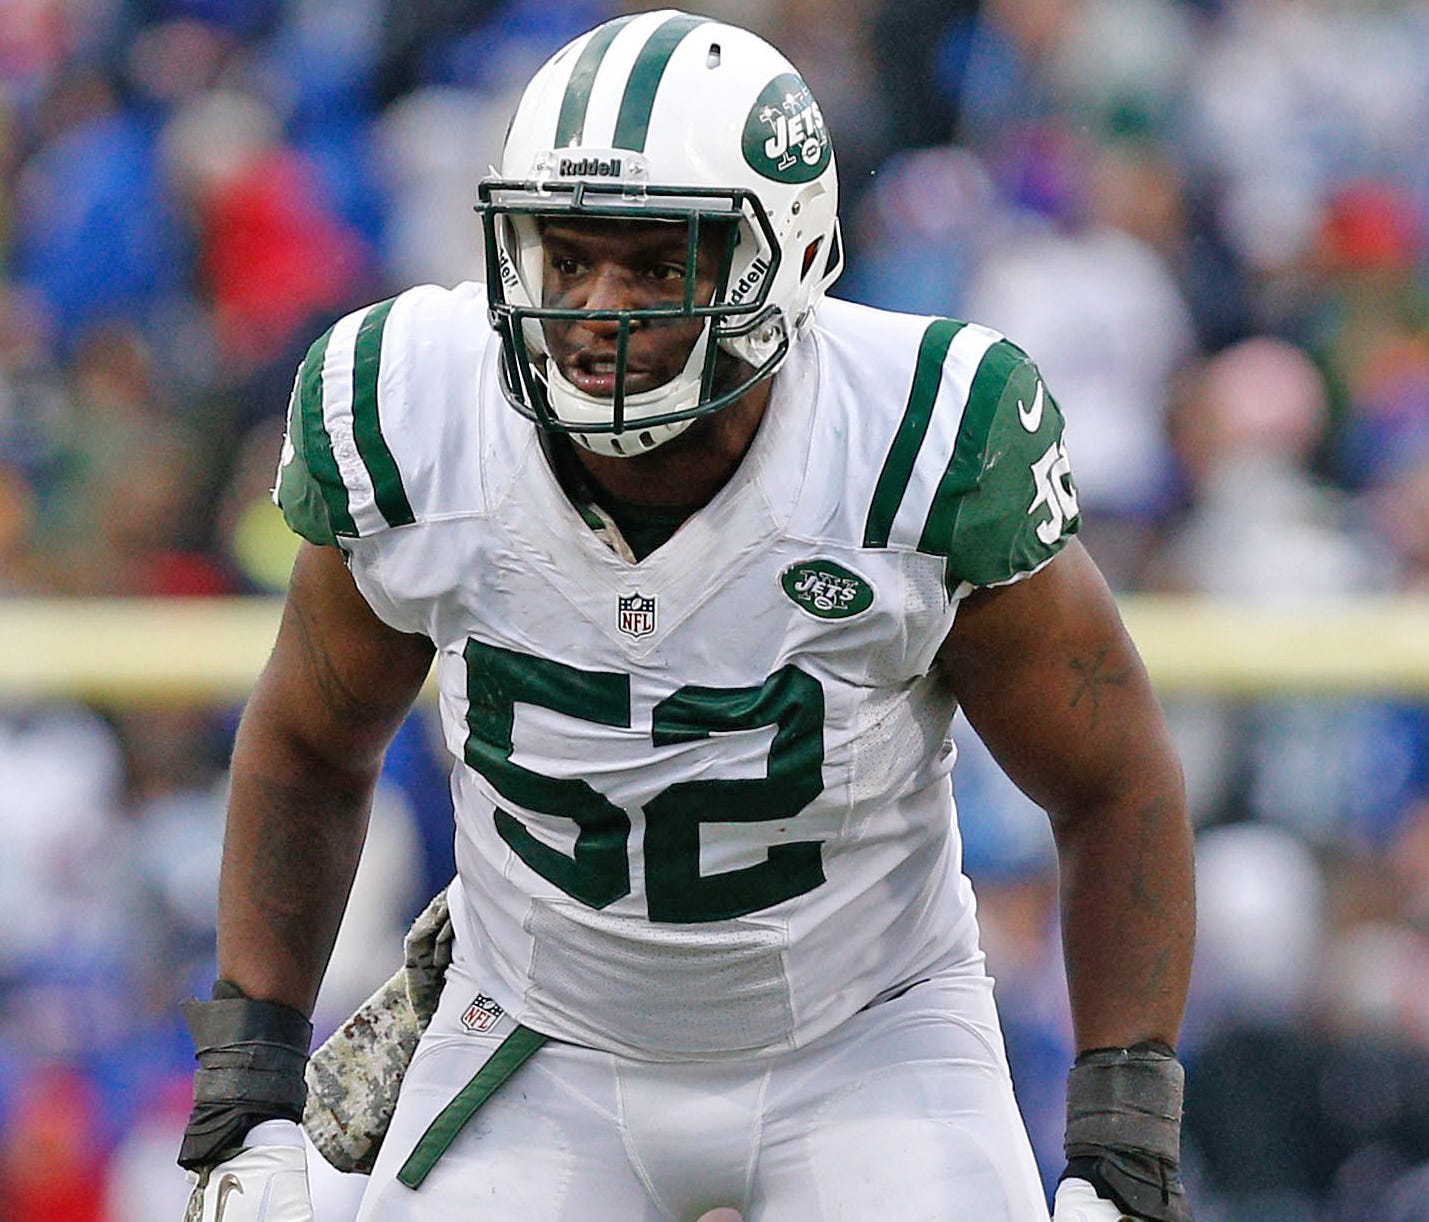 Former Jets LB David Harris exceeded 100 tackles in six of his first 10 NFL seasons.